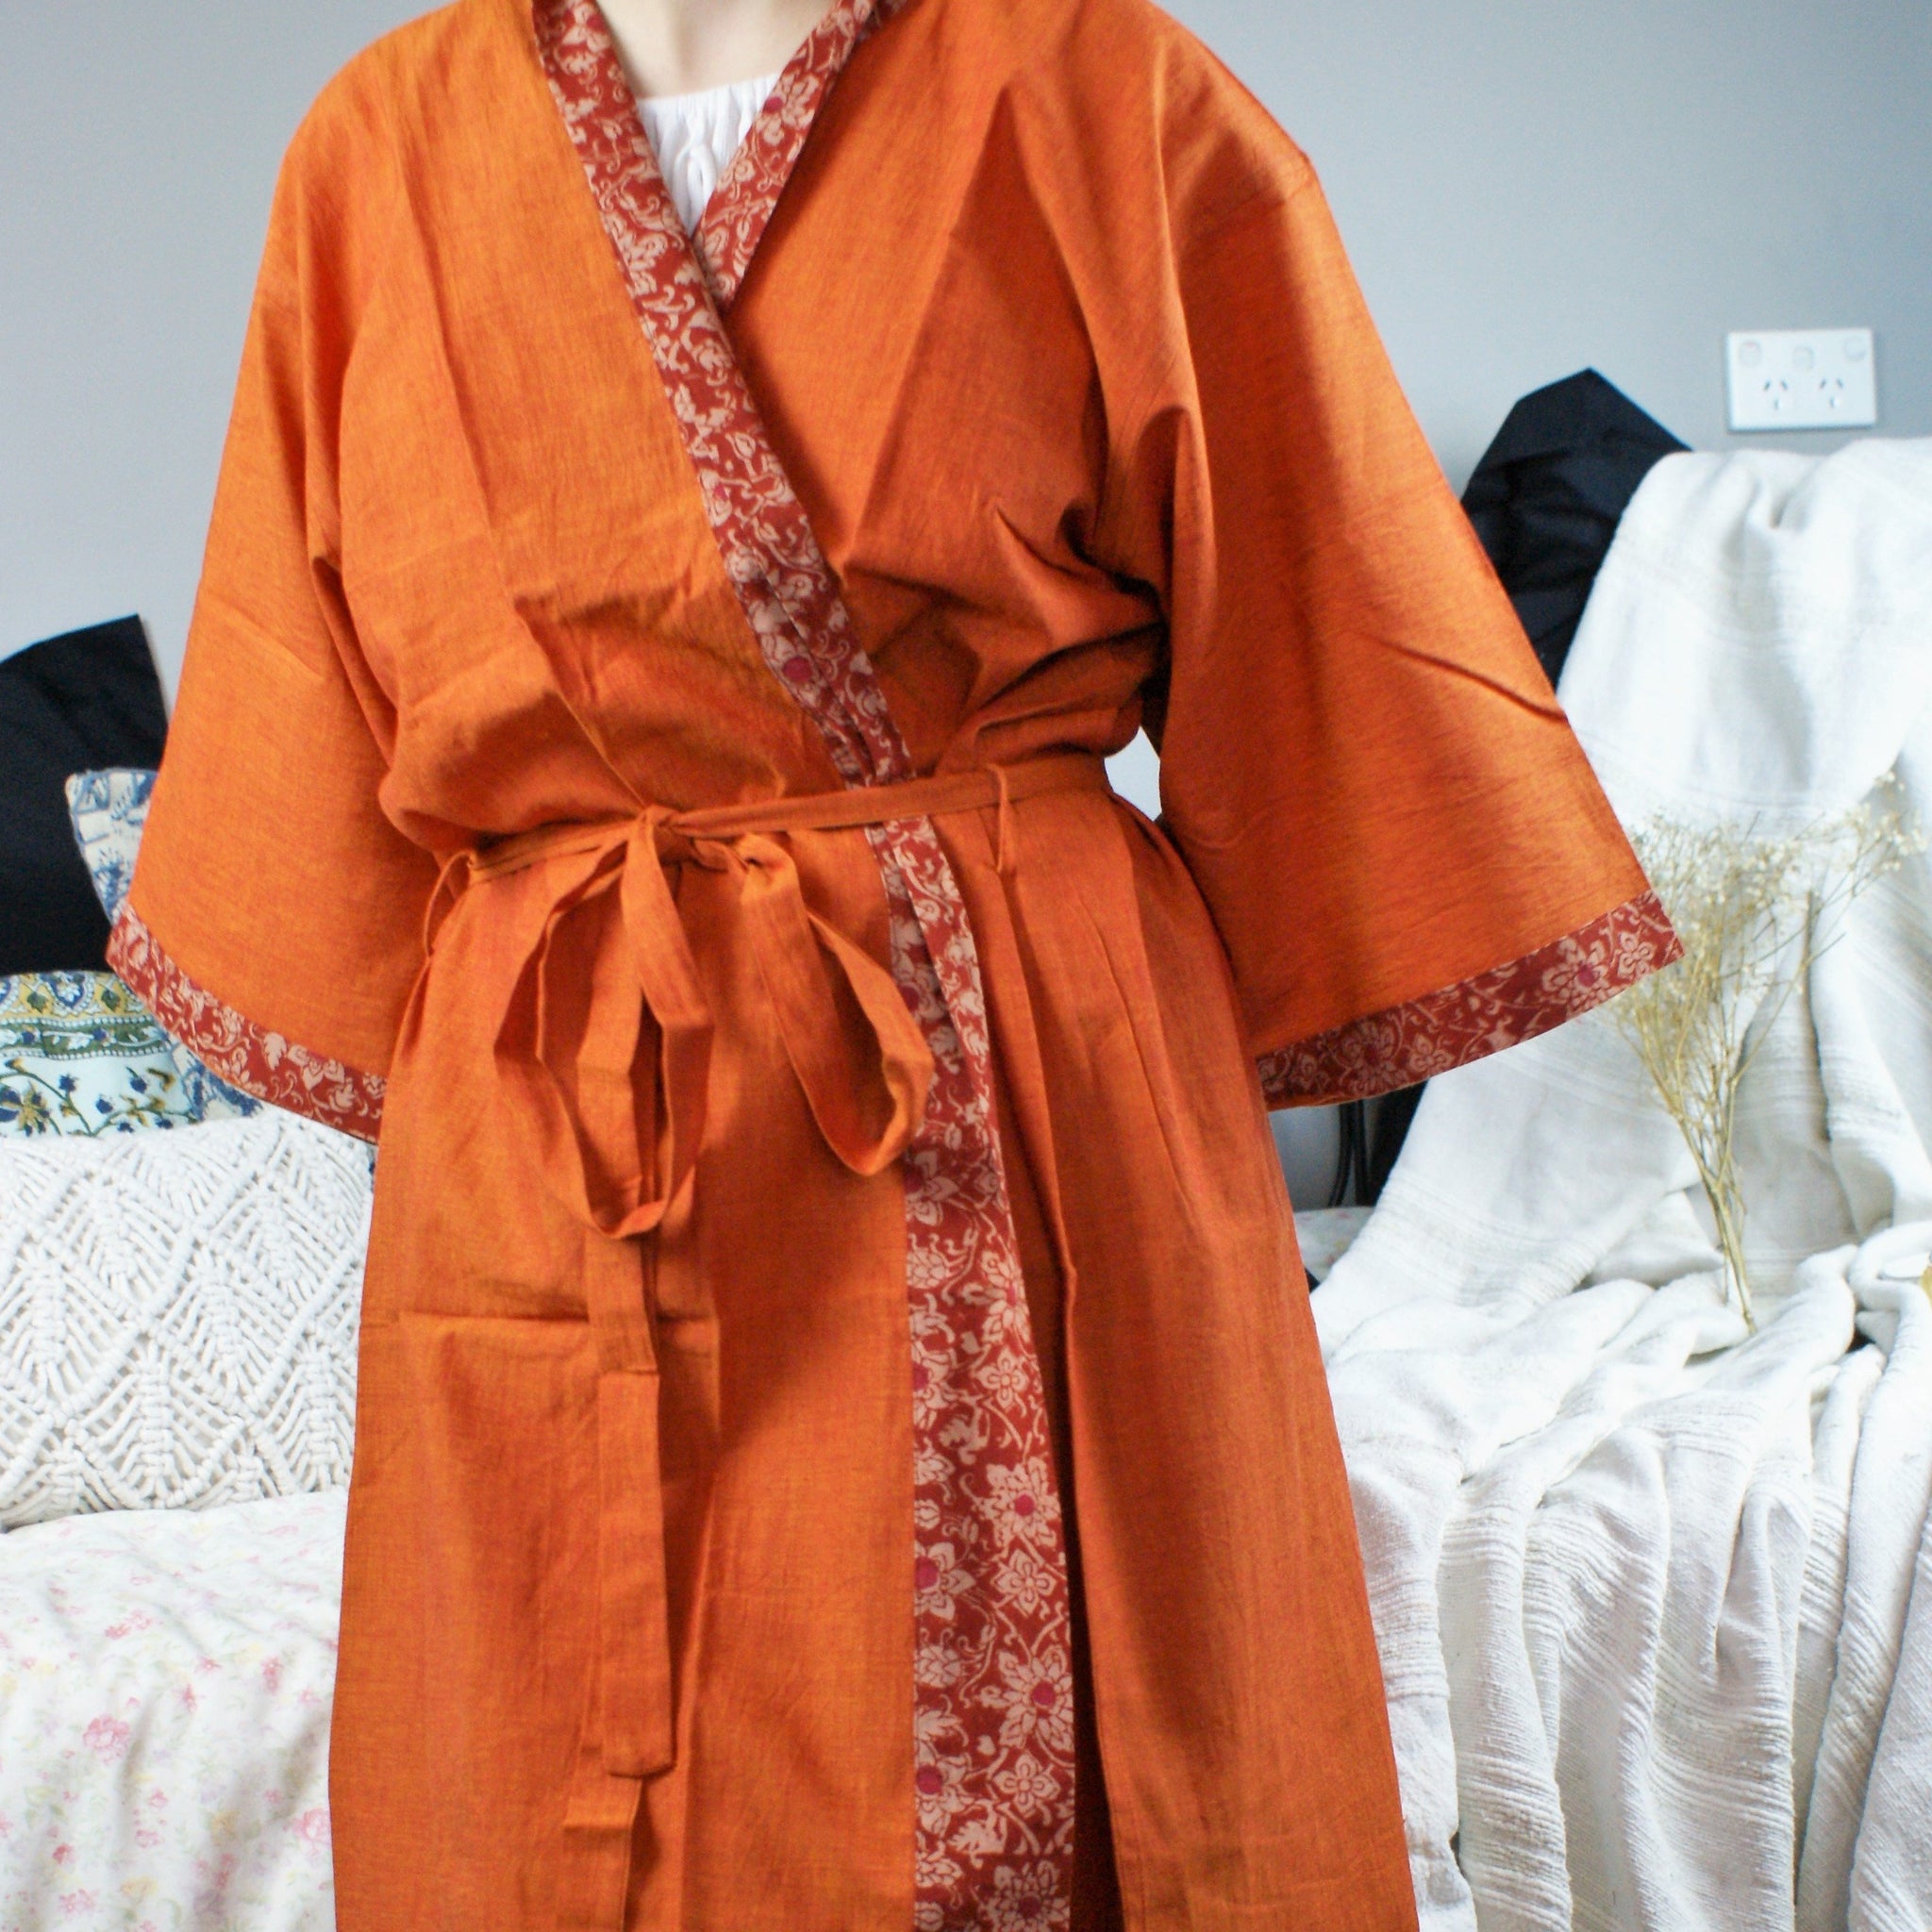 Fair Trade Ethical Cotton Robe Orange With Flowers